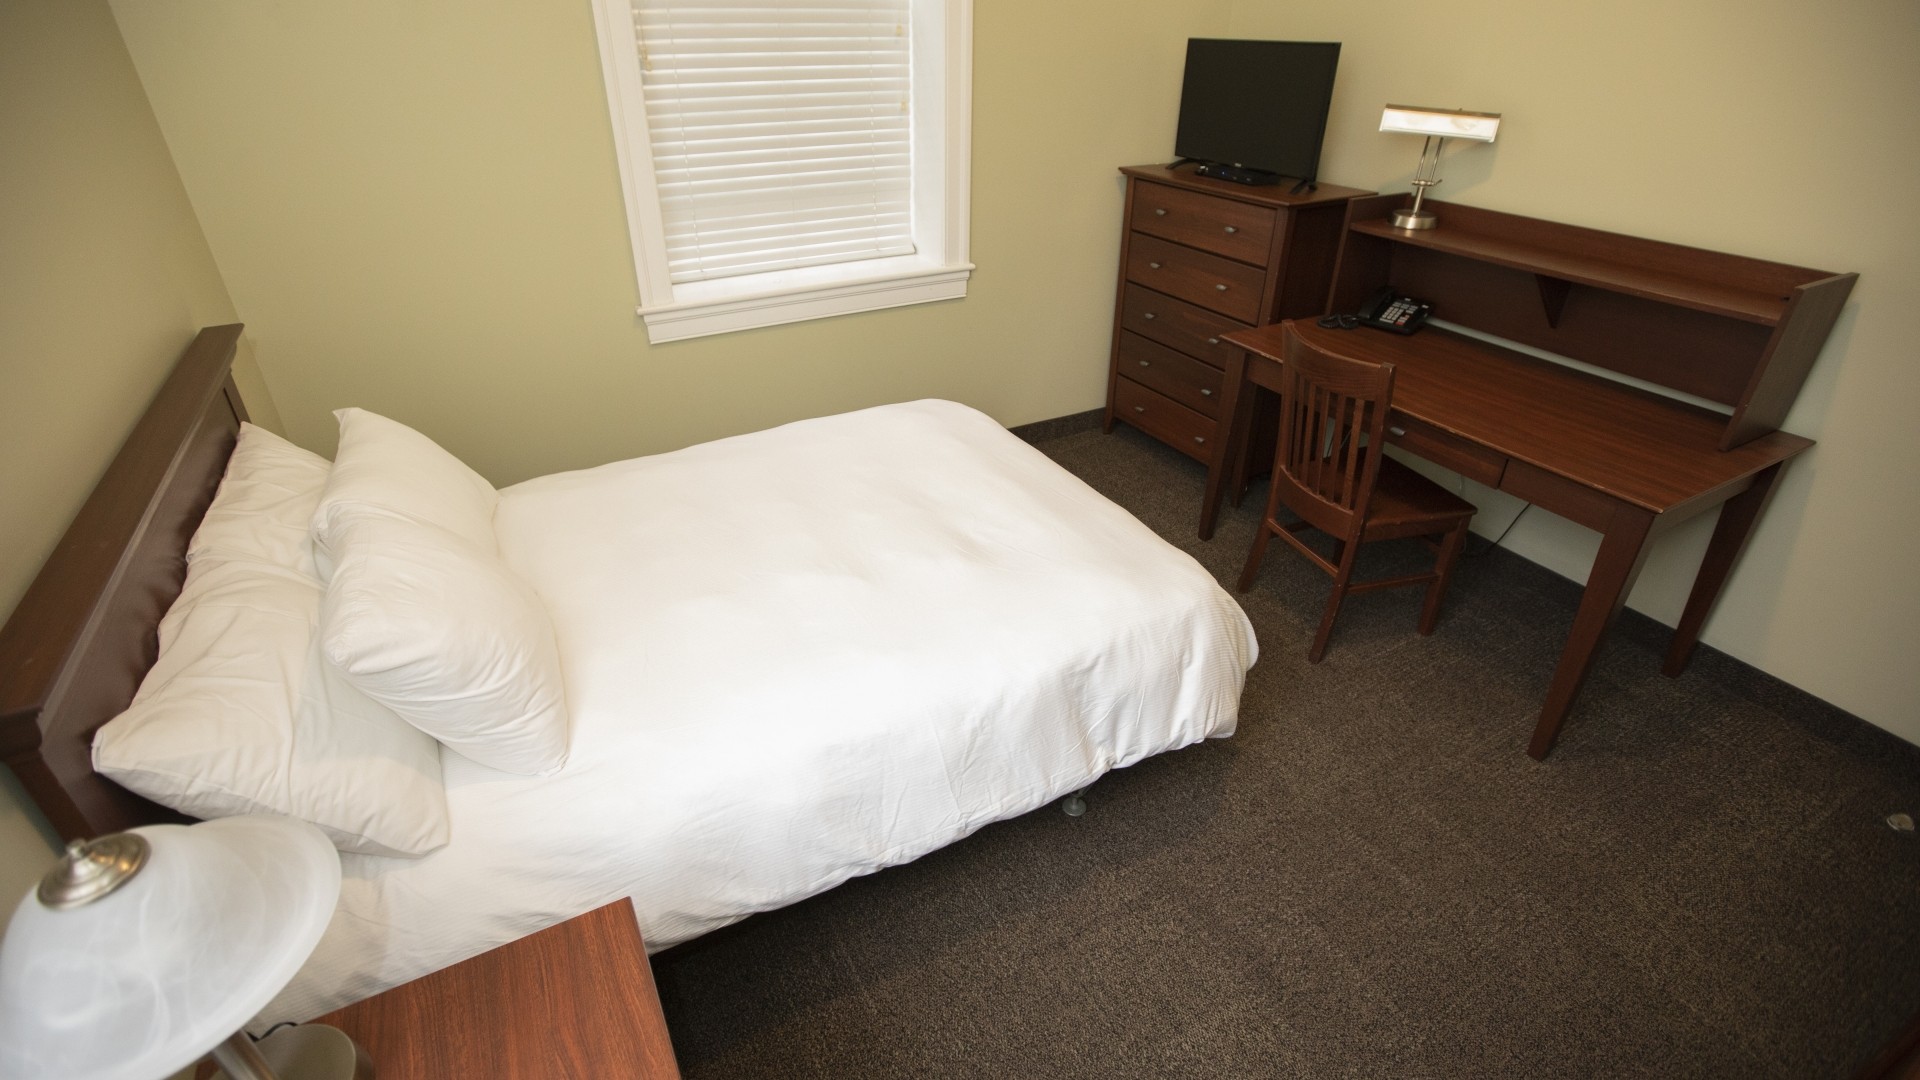 Governors Hall single room with a double bed, bedside table, desk, dresser and TV. 